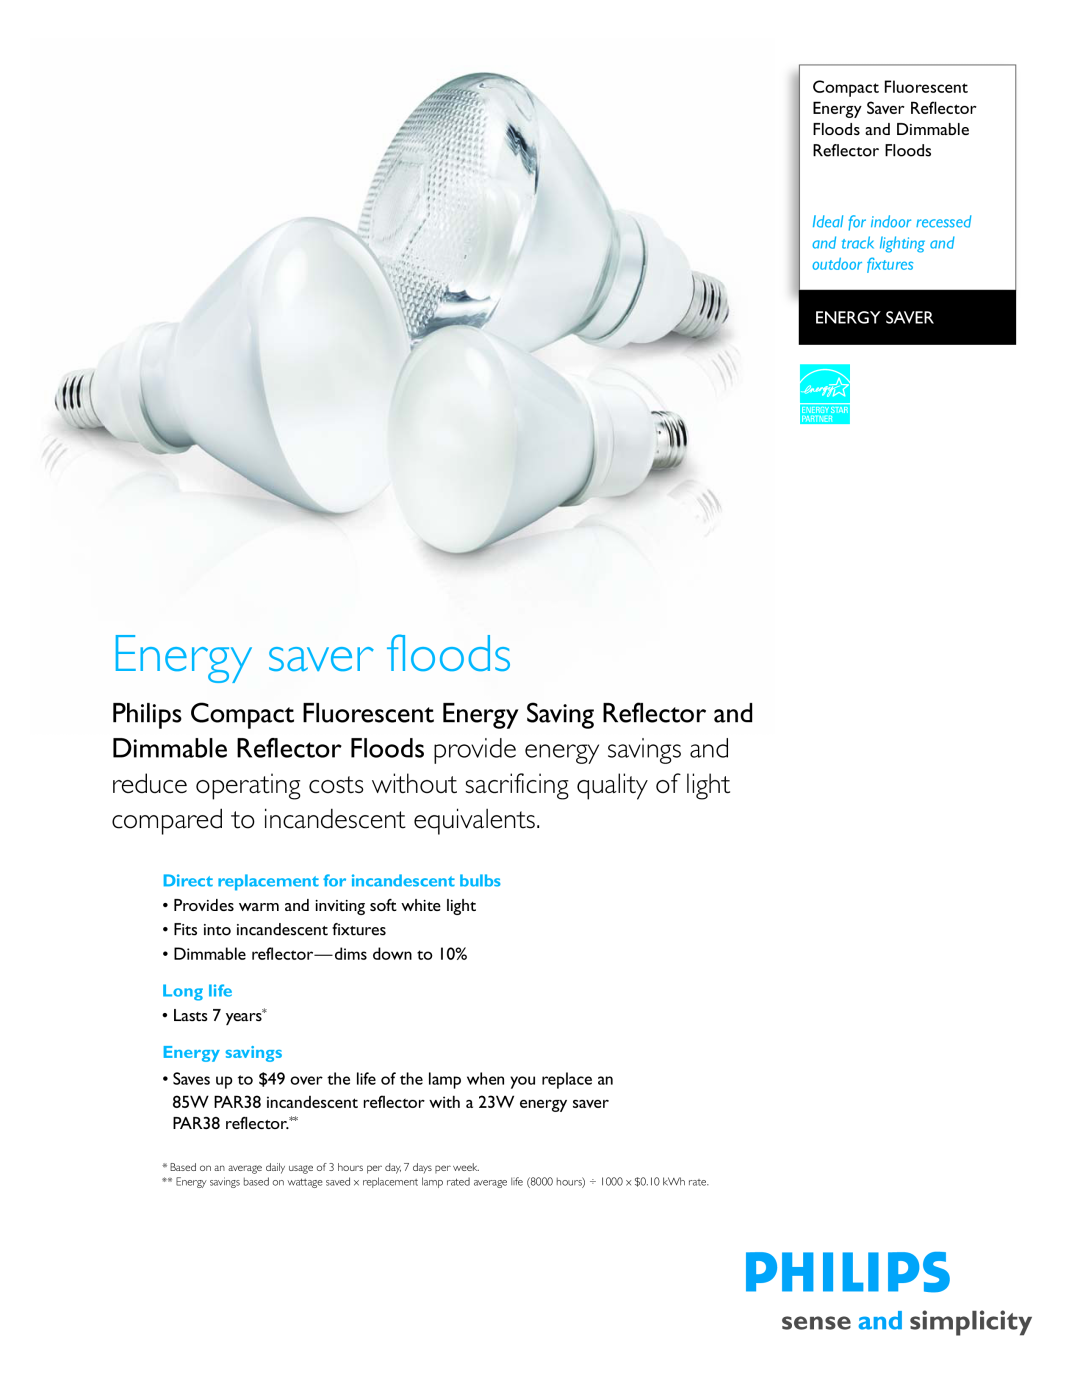 Philips P-8516-C manual Energy saver floods, Direct replacement for incandescent bulbs, Long life, Energy savings 